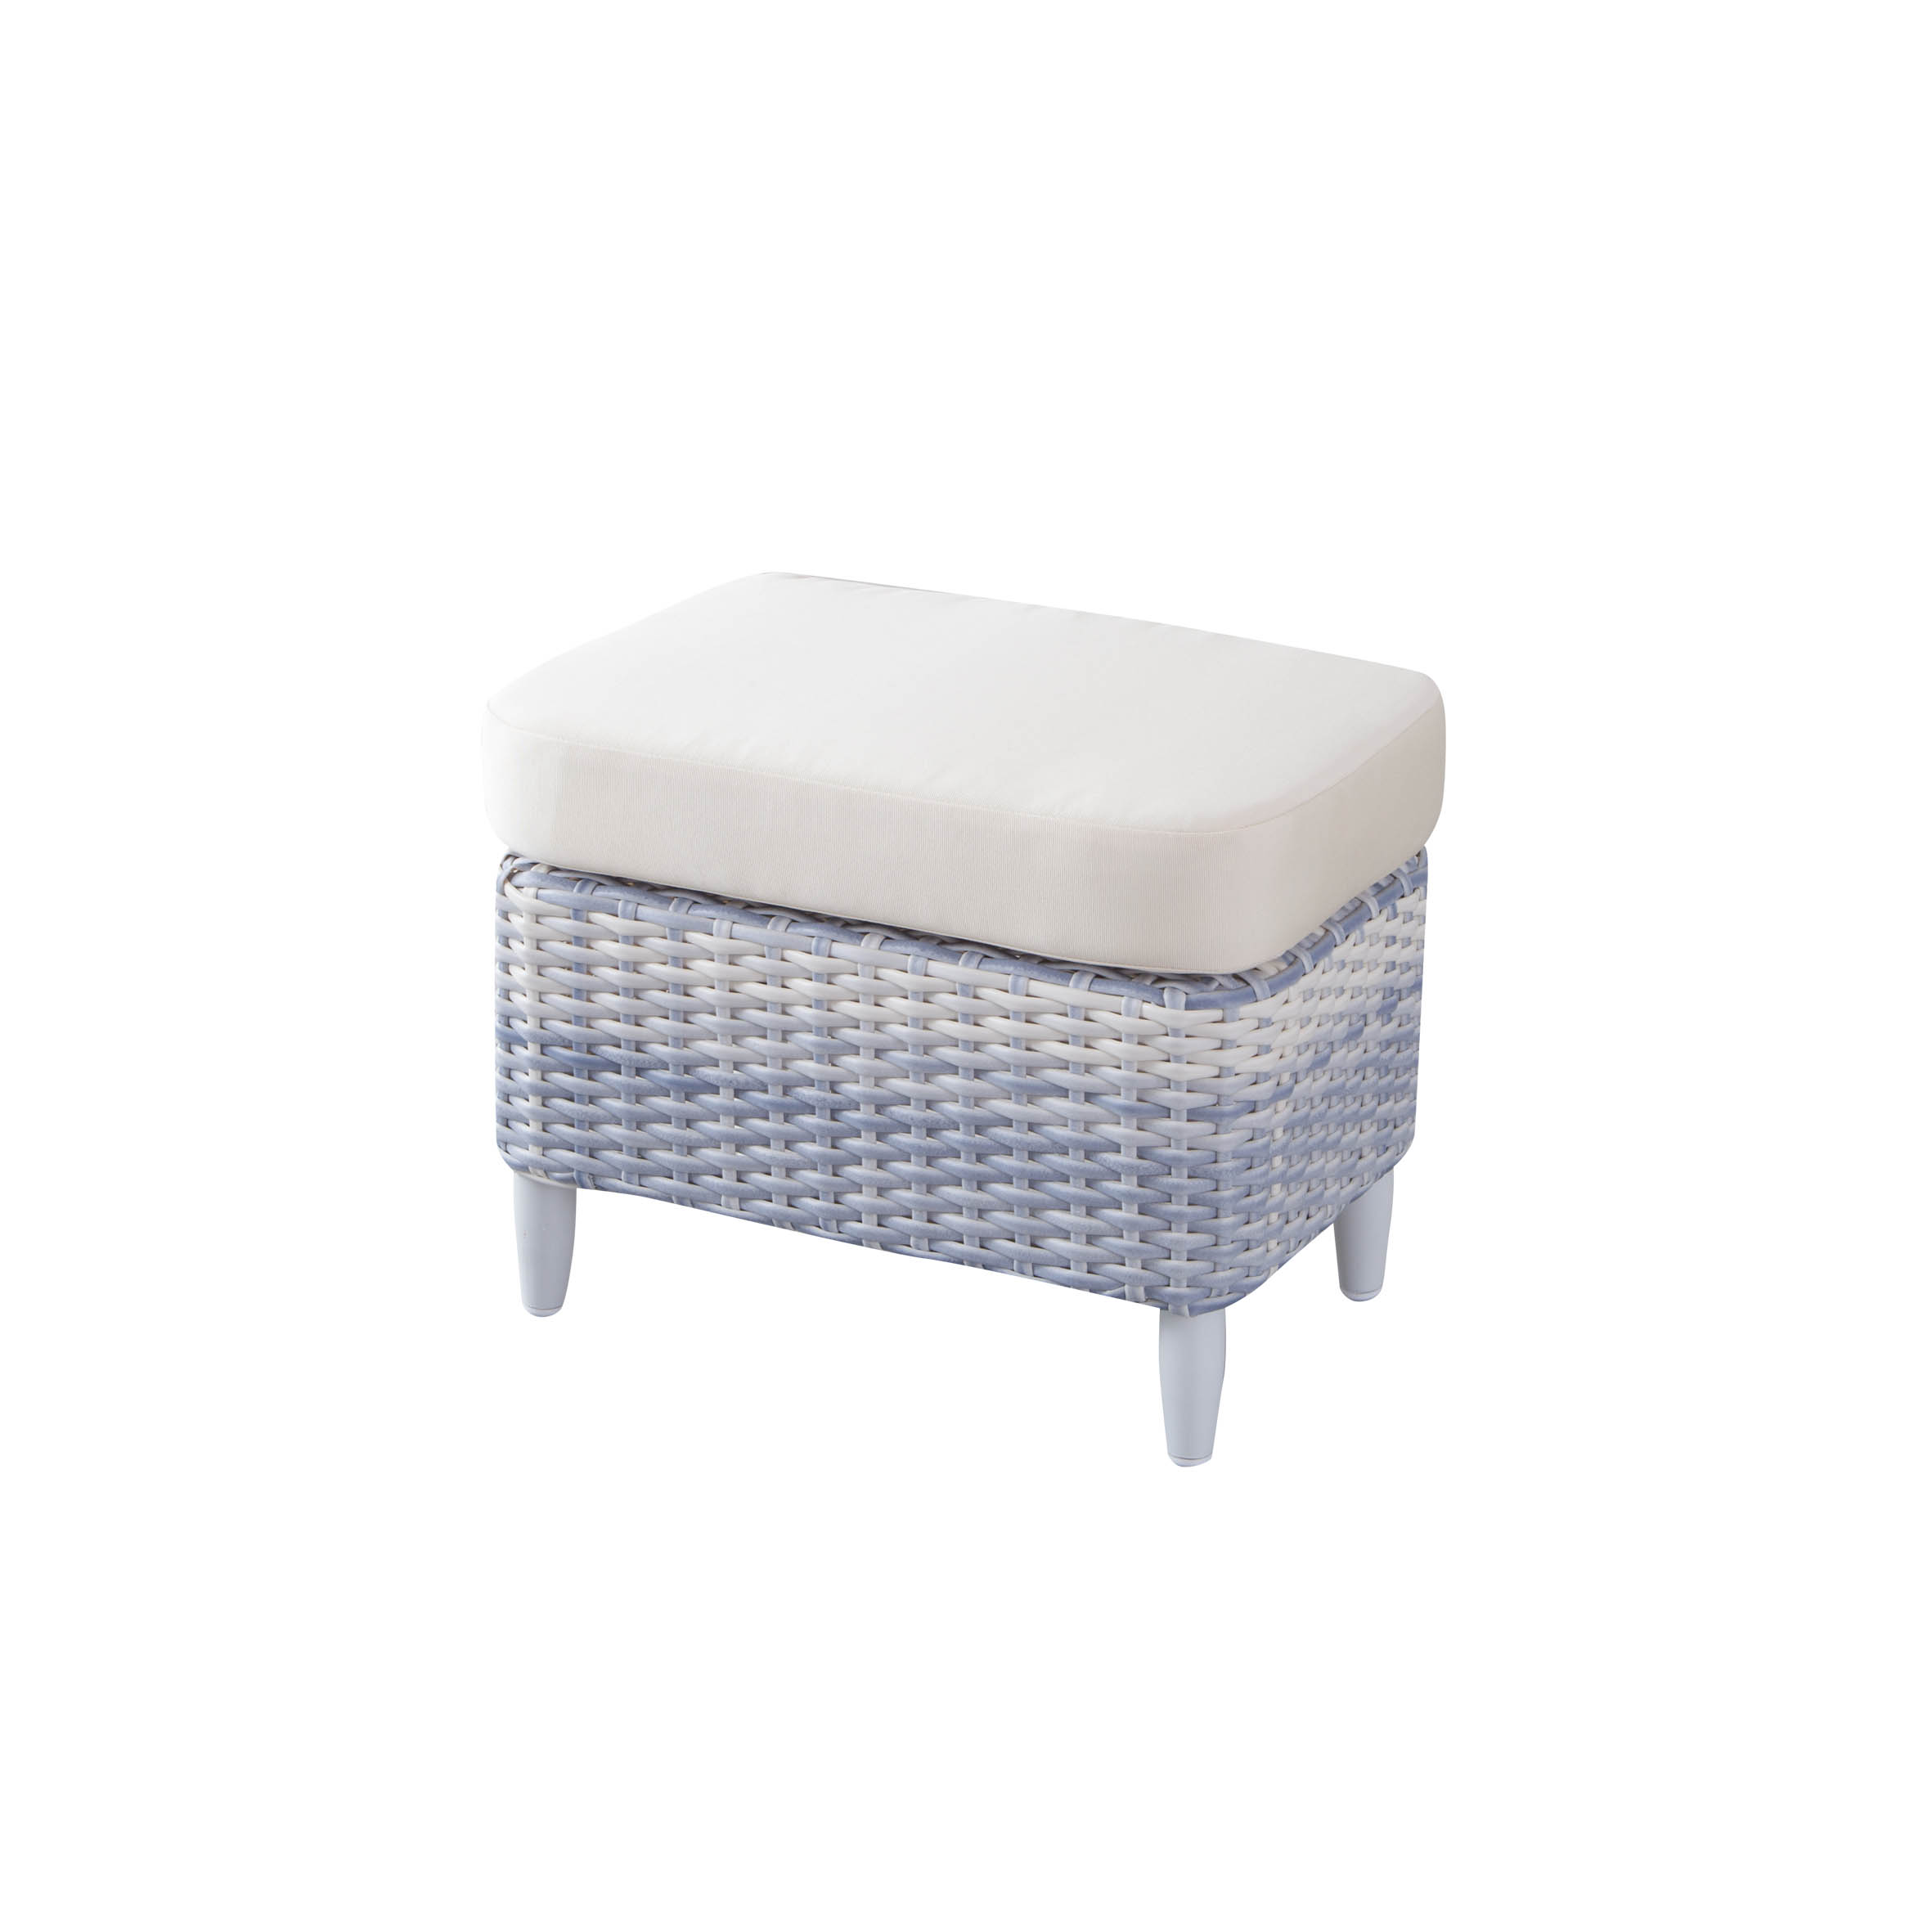 Butterfly sufra footstool S1